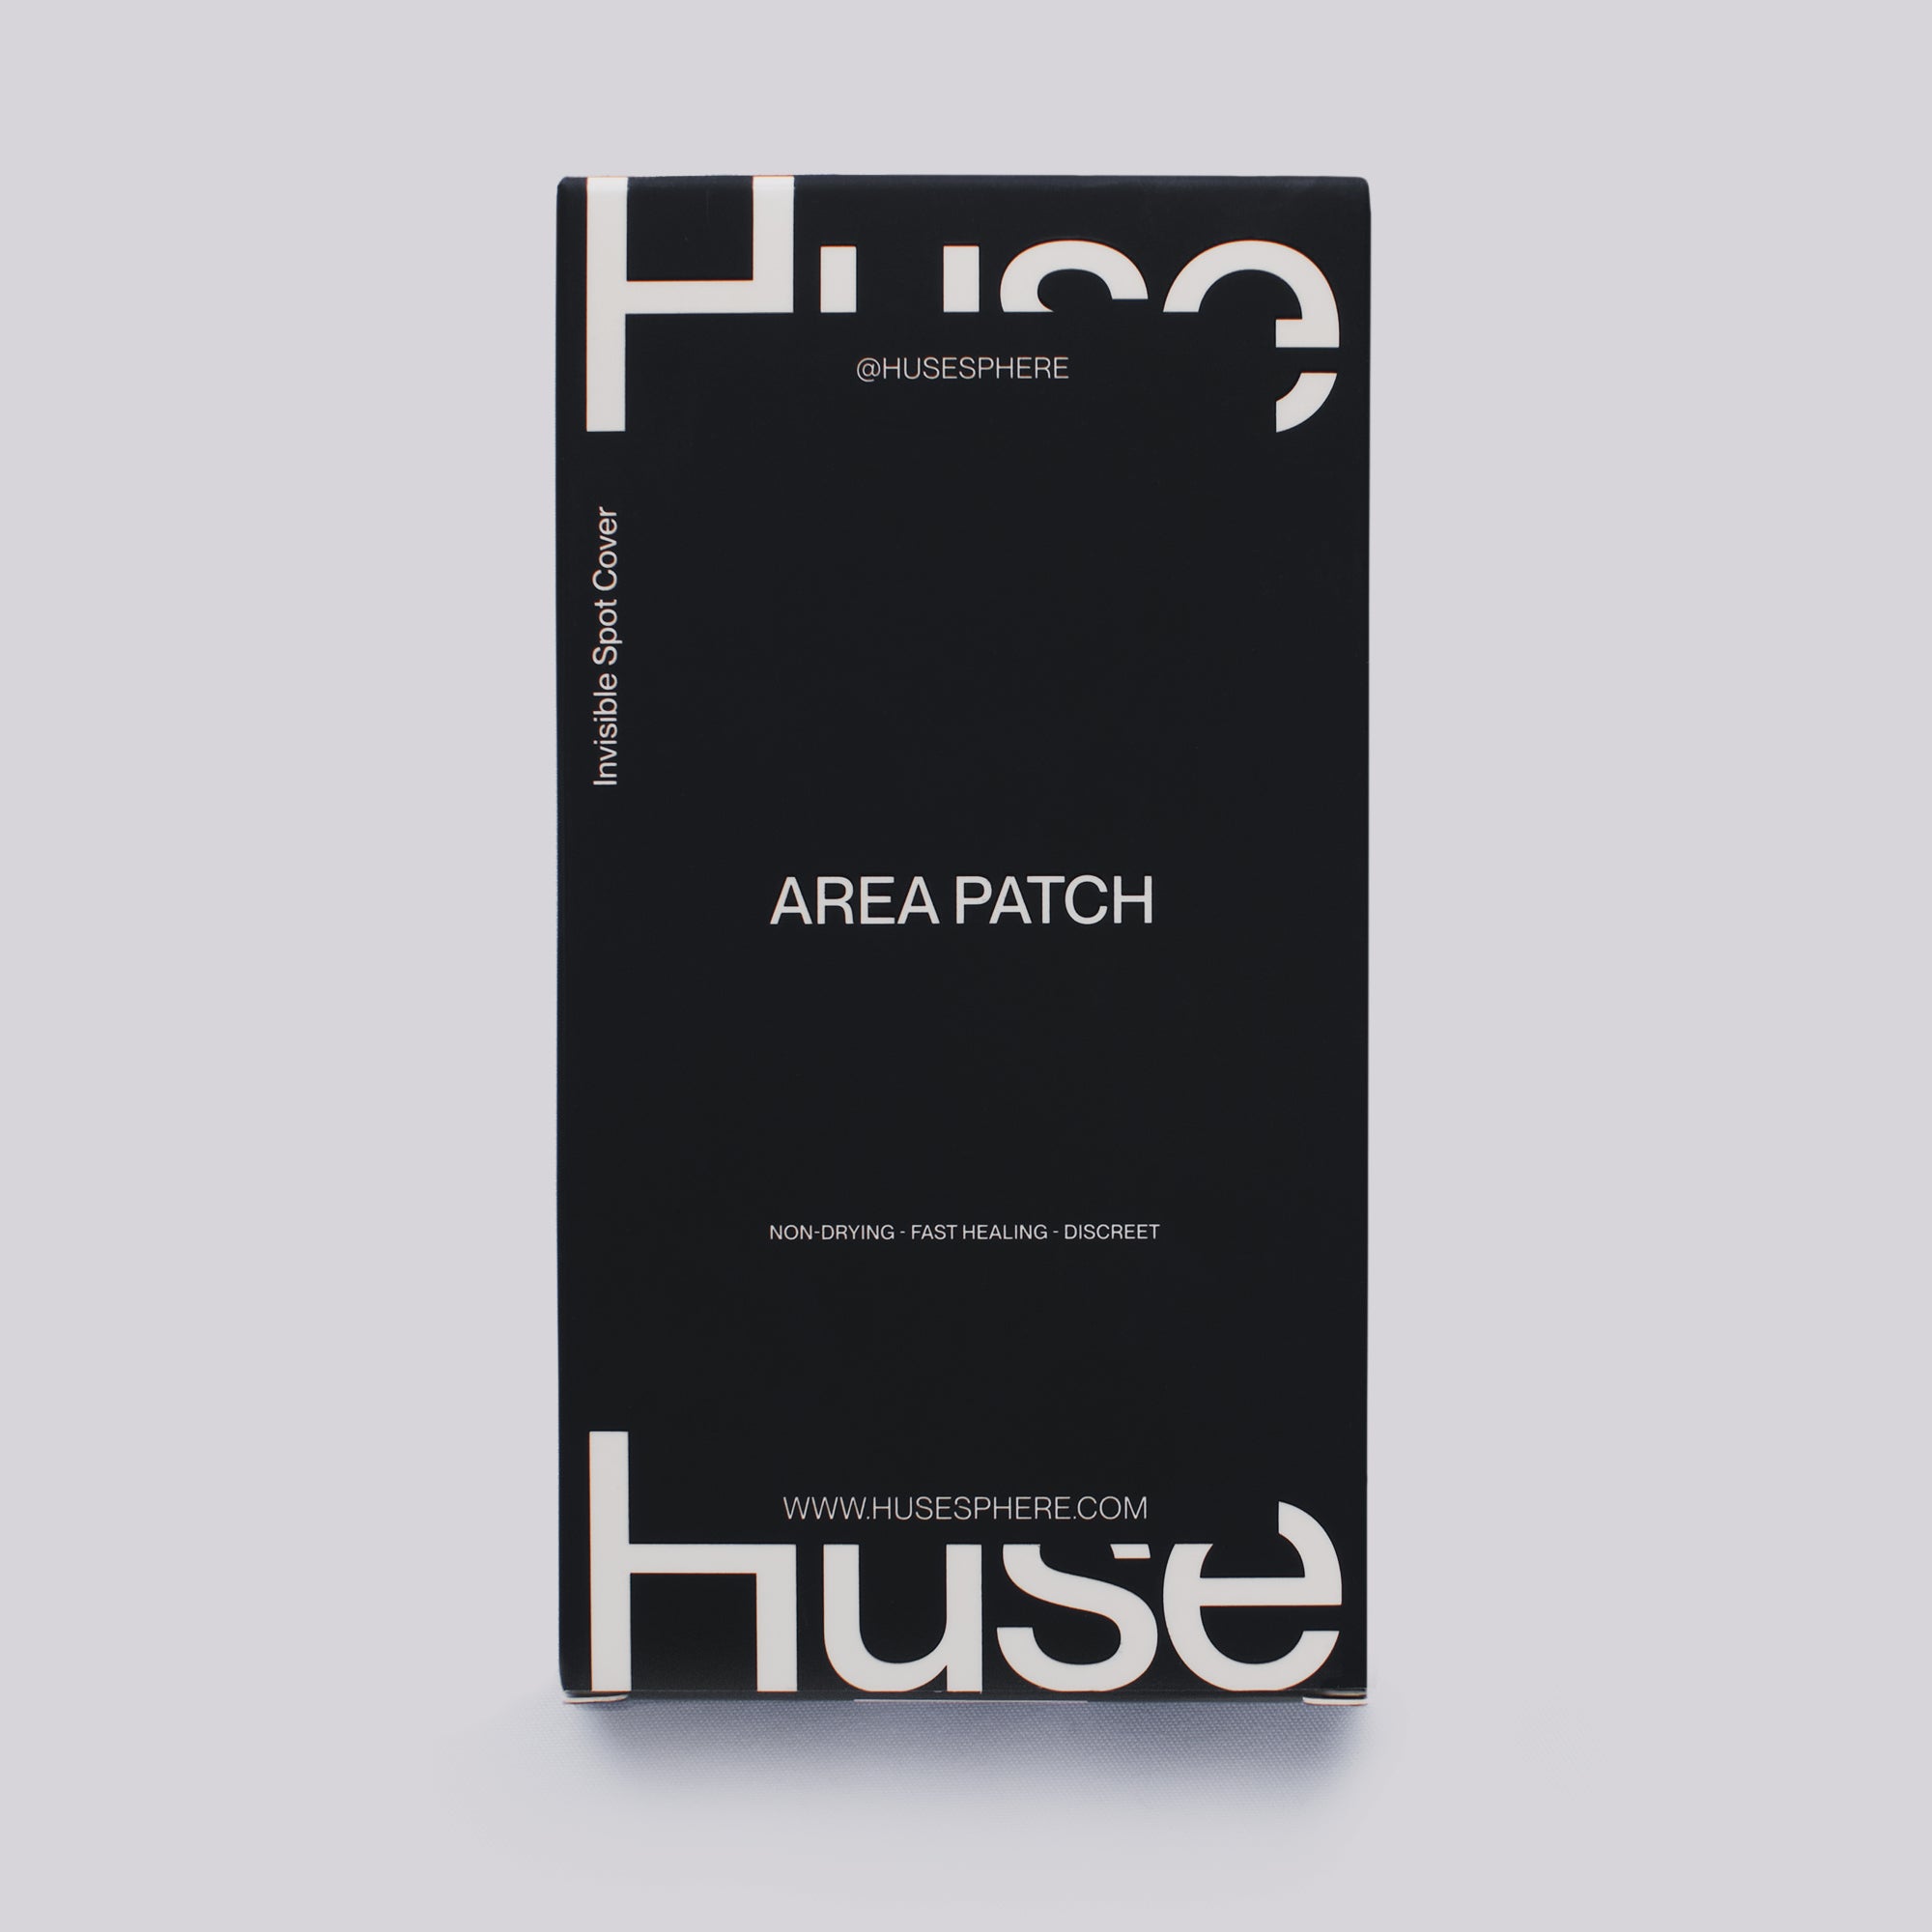 Huse Large Hydrocolloid Patch. Best for acne-prone skin, cystic acne, large breakouts, cluster breakouts, forehead texture, or small bumps on the skin.